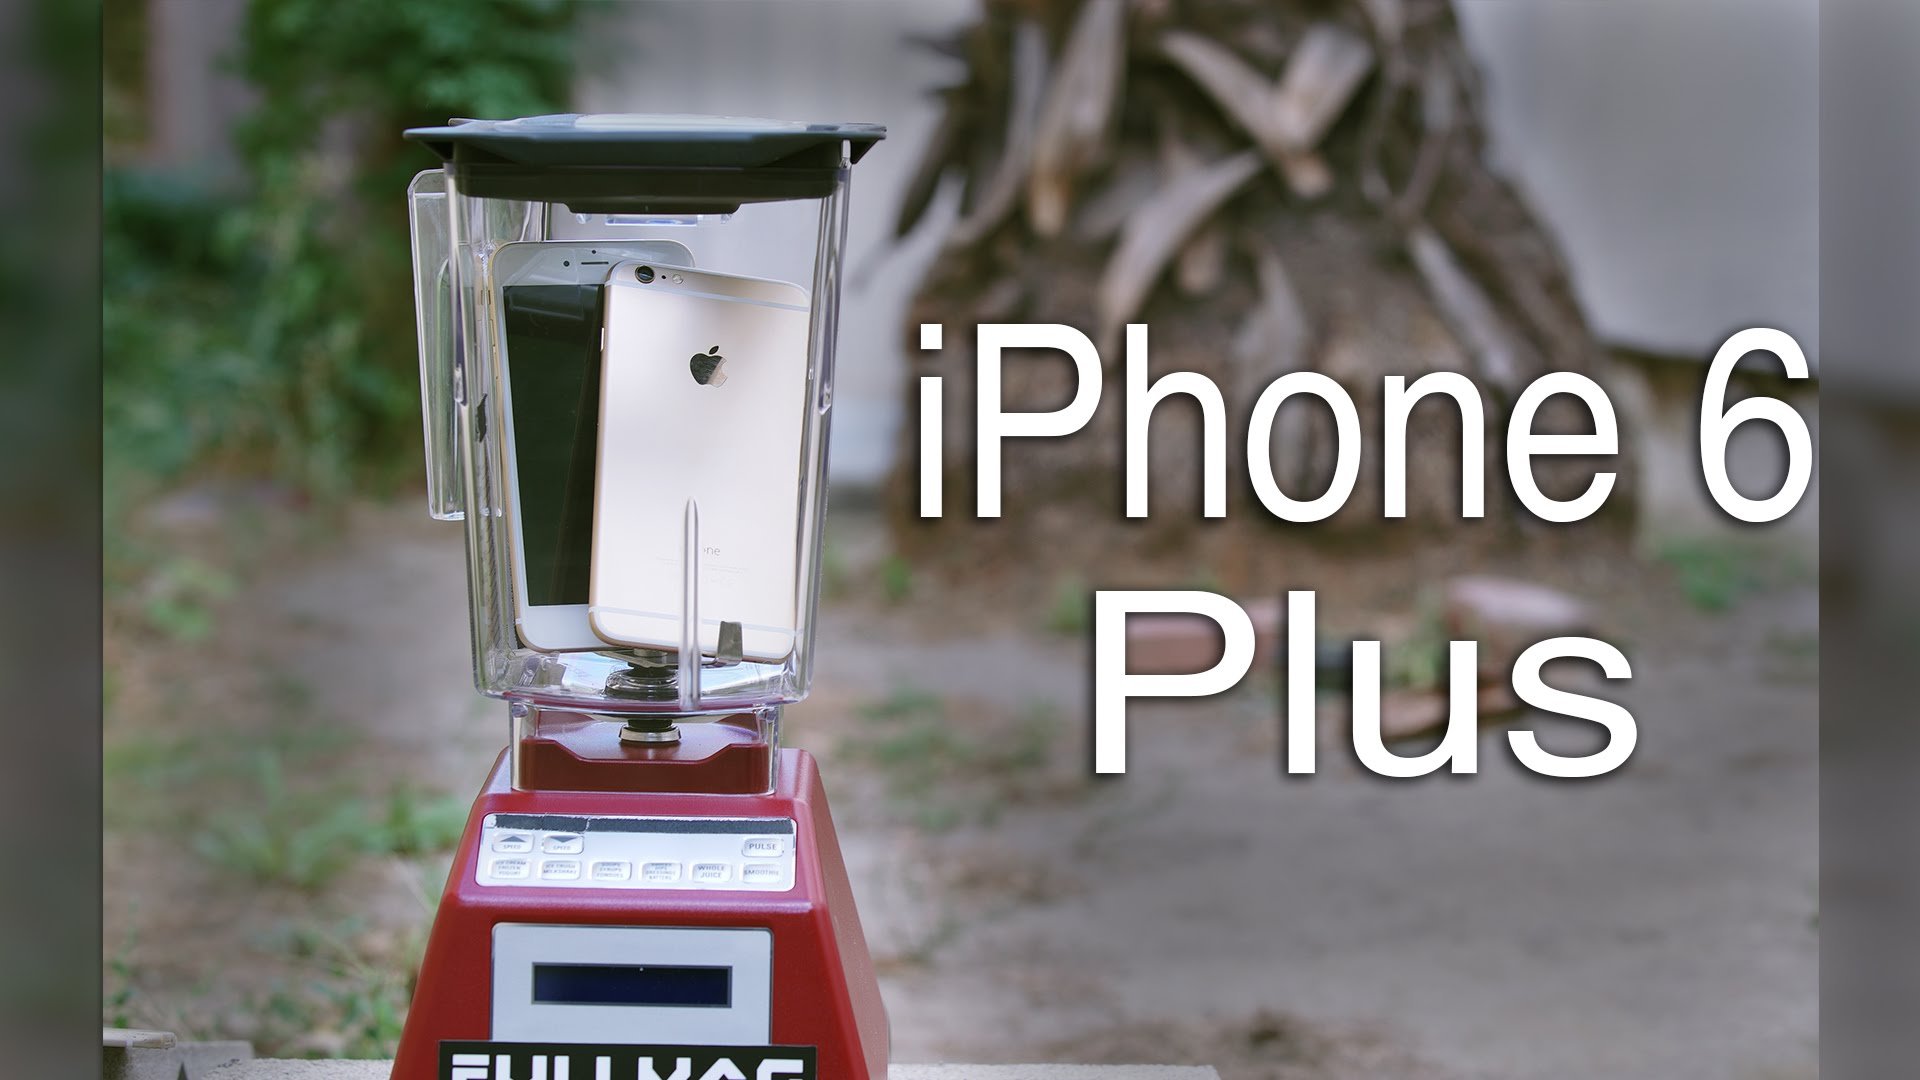 iPhone 6 Plus: Will it Blend? (Video) 3